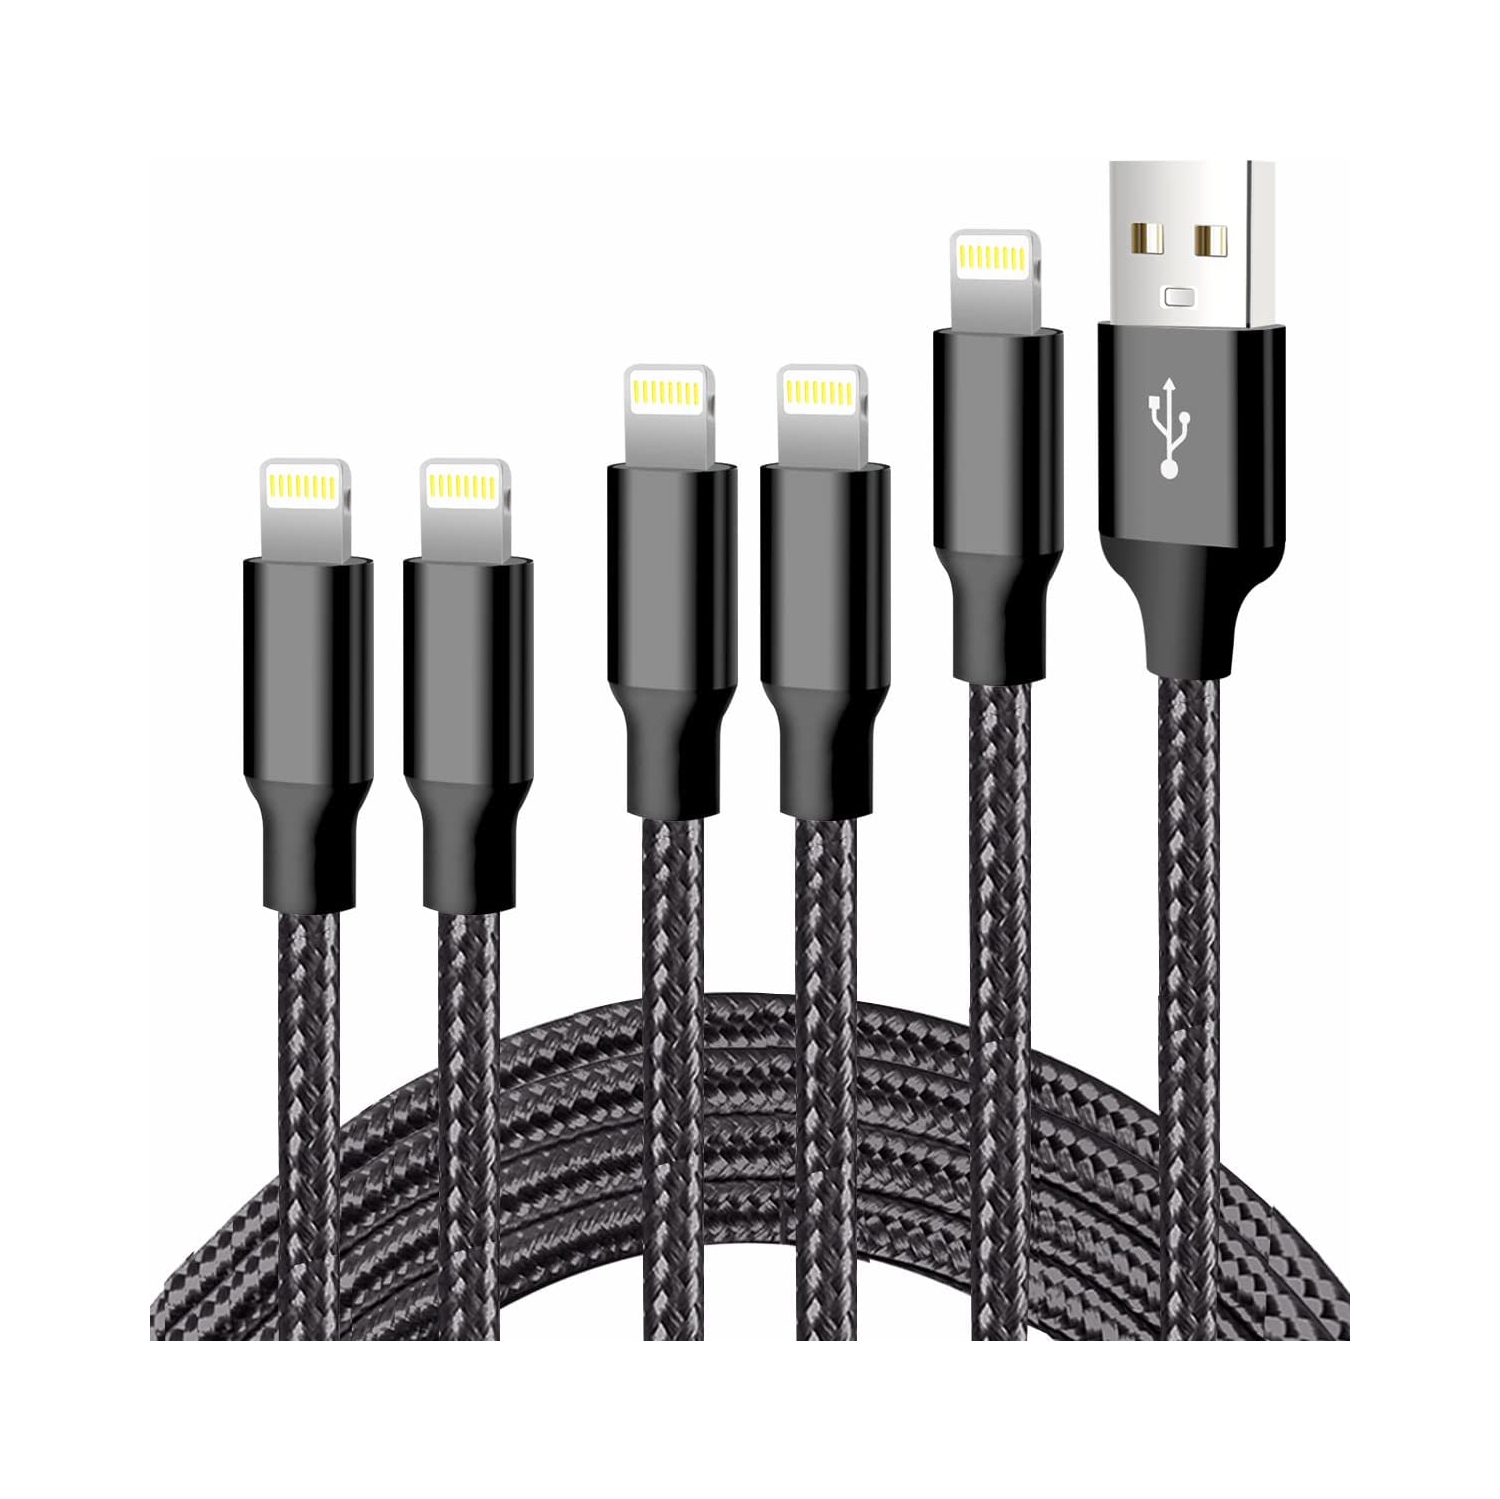 iPhone Charger Cable, C 5 Pack[3/3/6/6/10FT] MFi Certified USB Lightning Cable Nylon Braided Charging Cord Compatible for iPhone X/Max/12/11/8/7/6/6S/5/5S/SE/Plus/iPad - Black